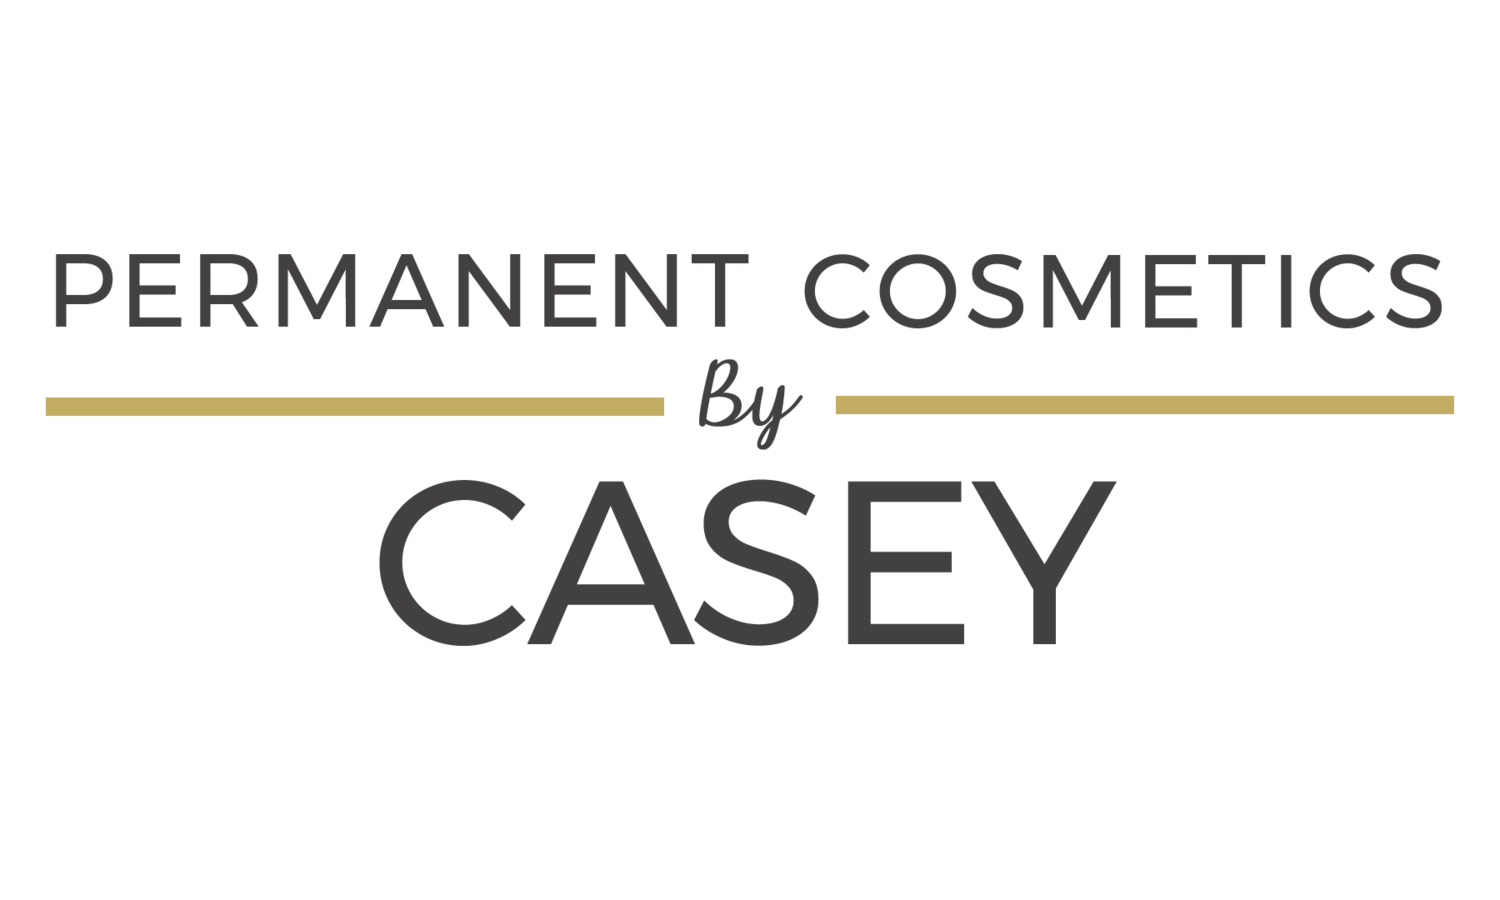 Permanent Cosmetics by Casey